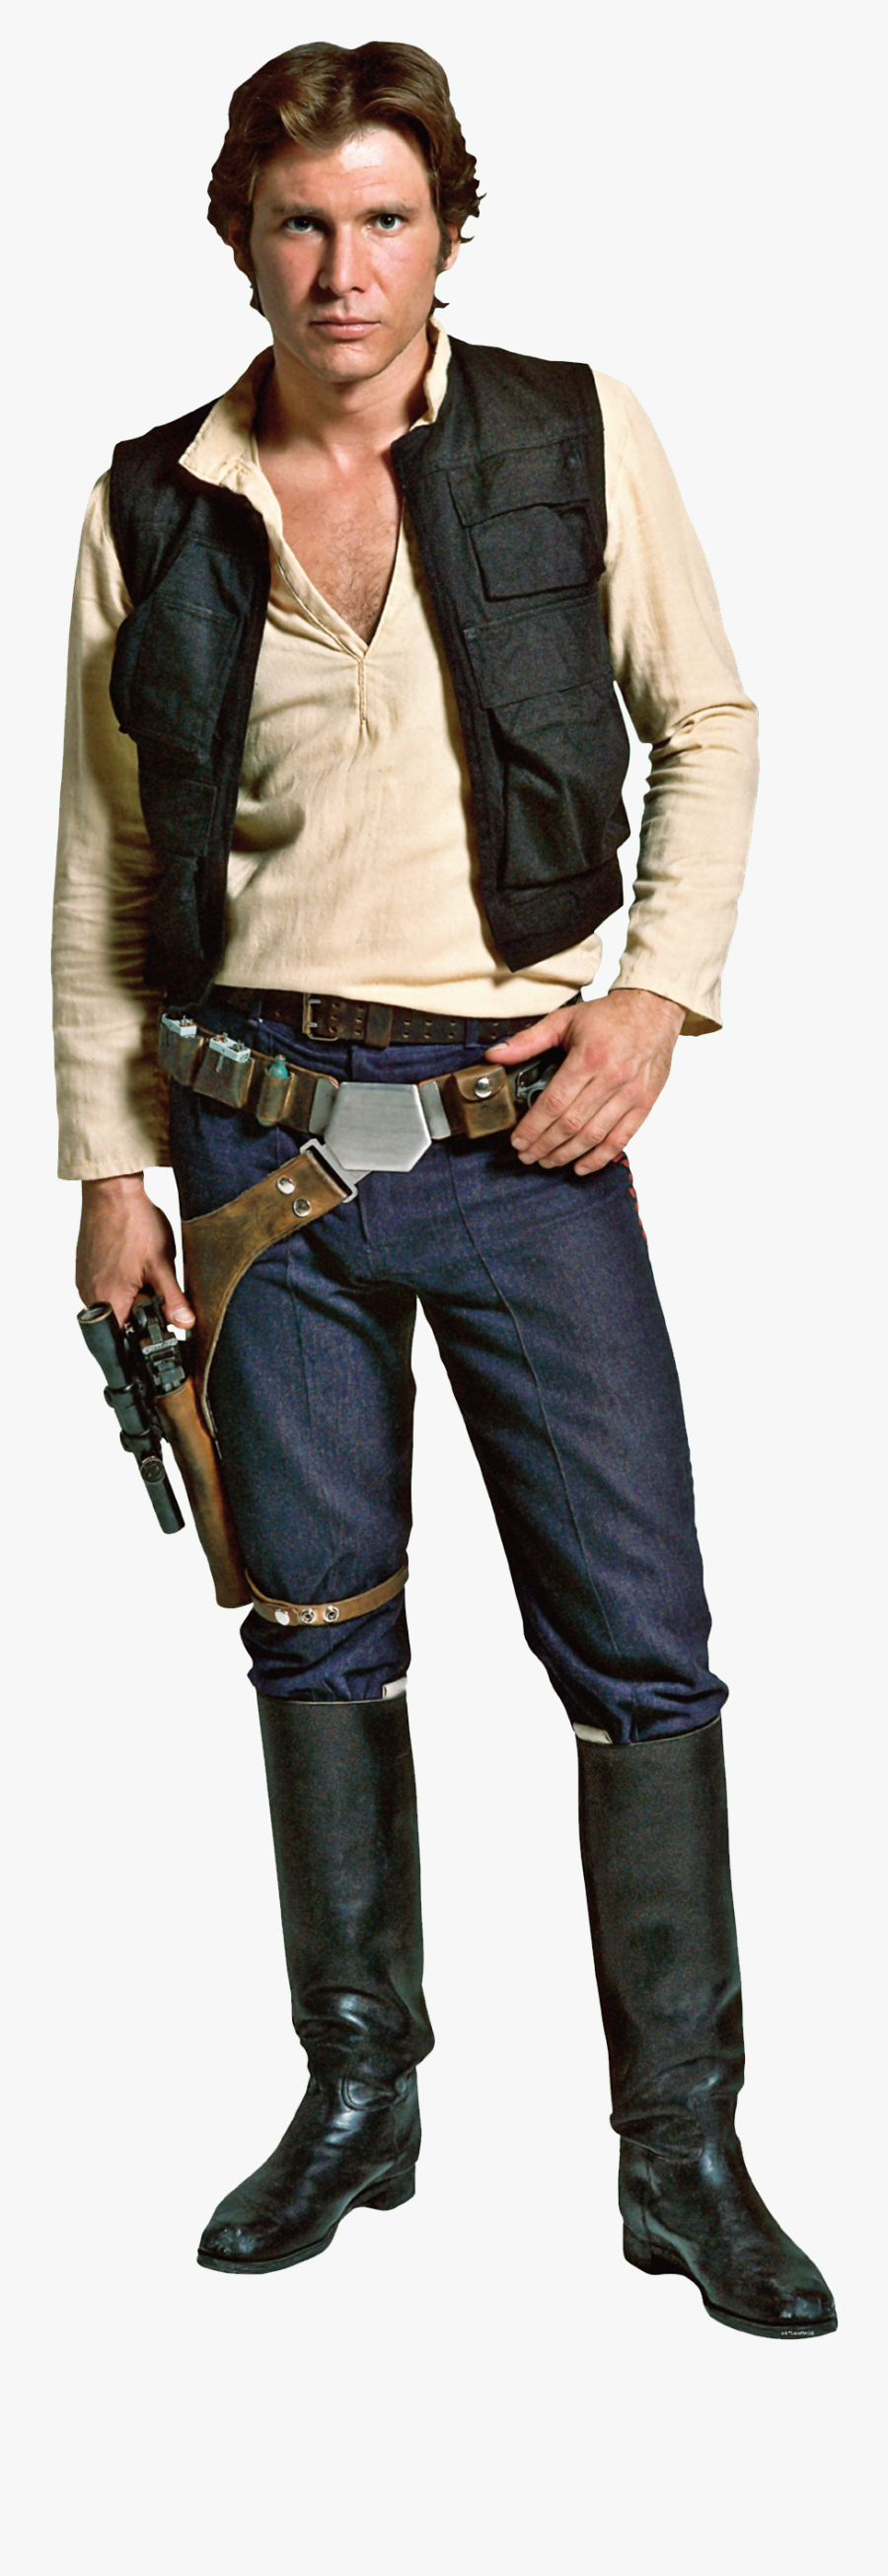 Han Solo Png - Star Wars Han Solo Png, Transparent Clipart